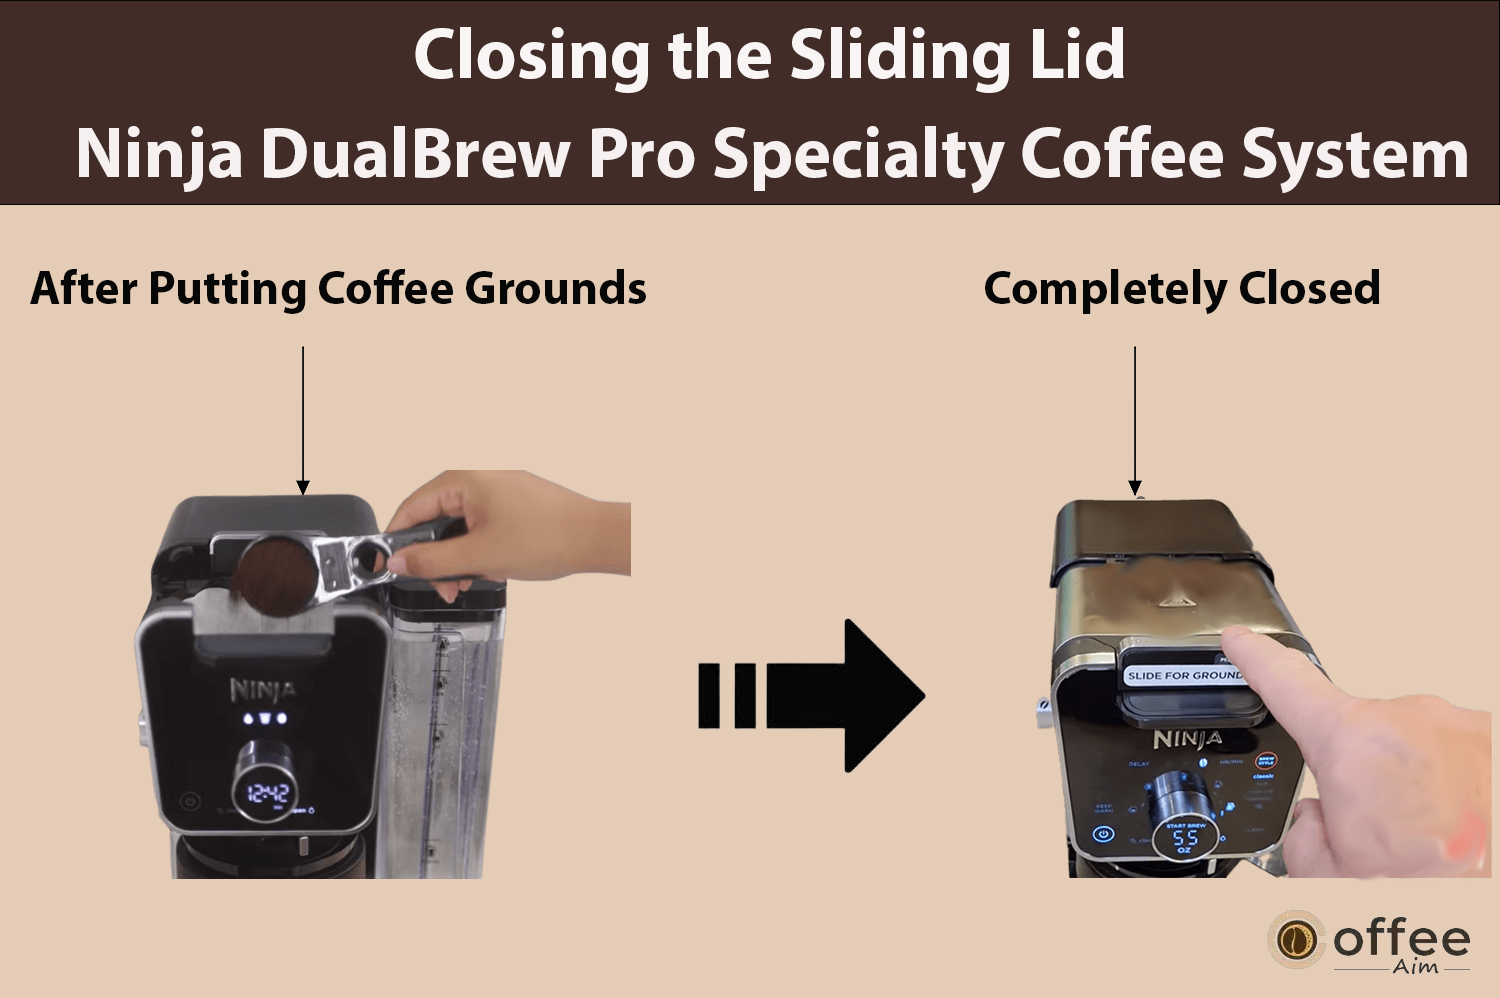 "This image illustrates the process of placing coffee grounds and subsequently closing the sliding lid on the Ninja DualBrew Pro Specialty Coffee System, as highlighted in the article 'How to Use Ninja DualBrew Pro Specialty Coffee System, Compatible with K-Cup Pods, and 12-Cup Drip Coffee Maker'."